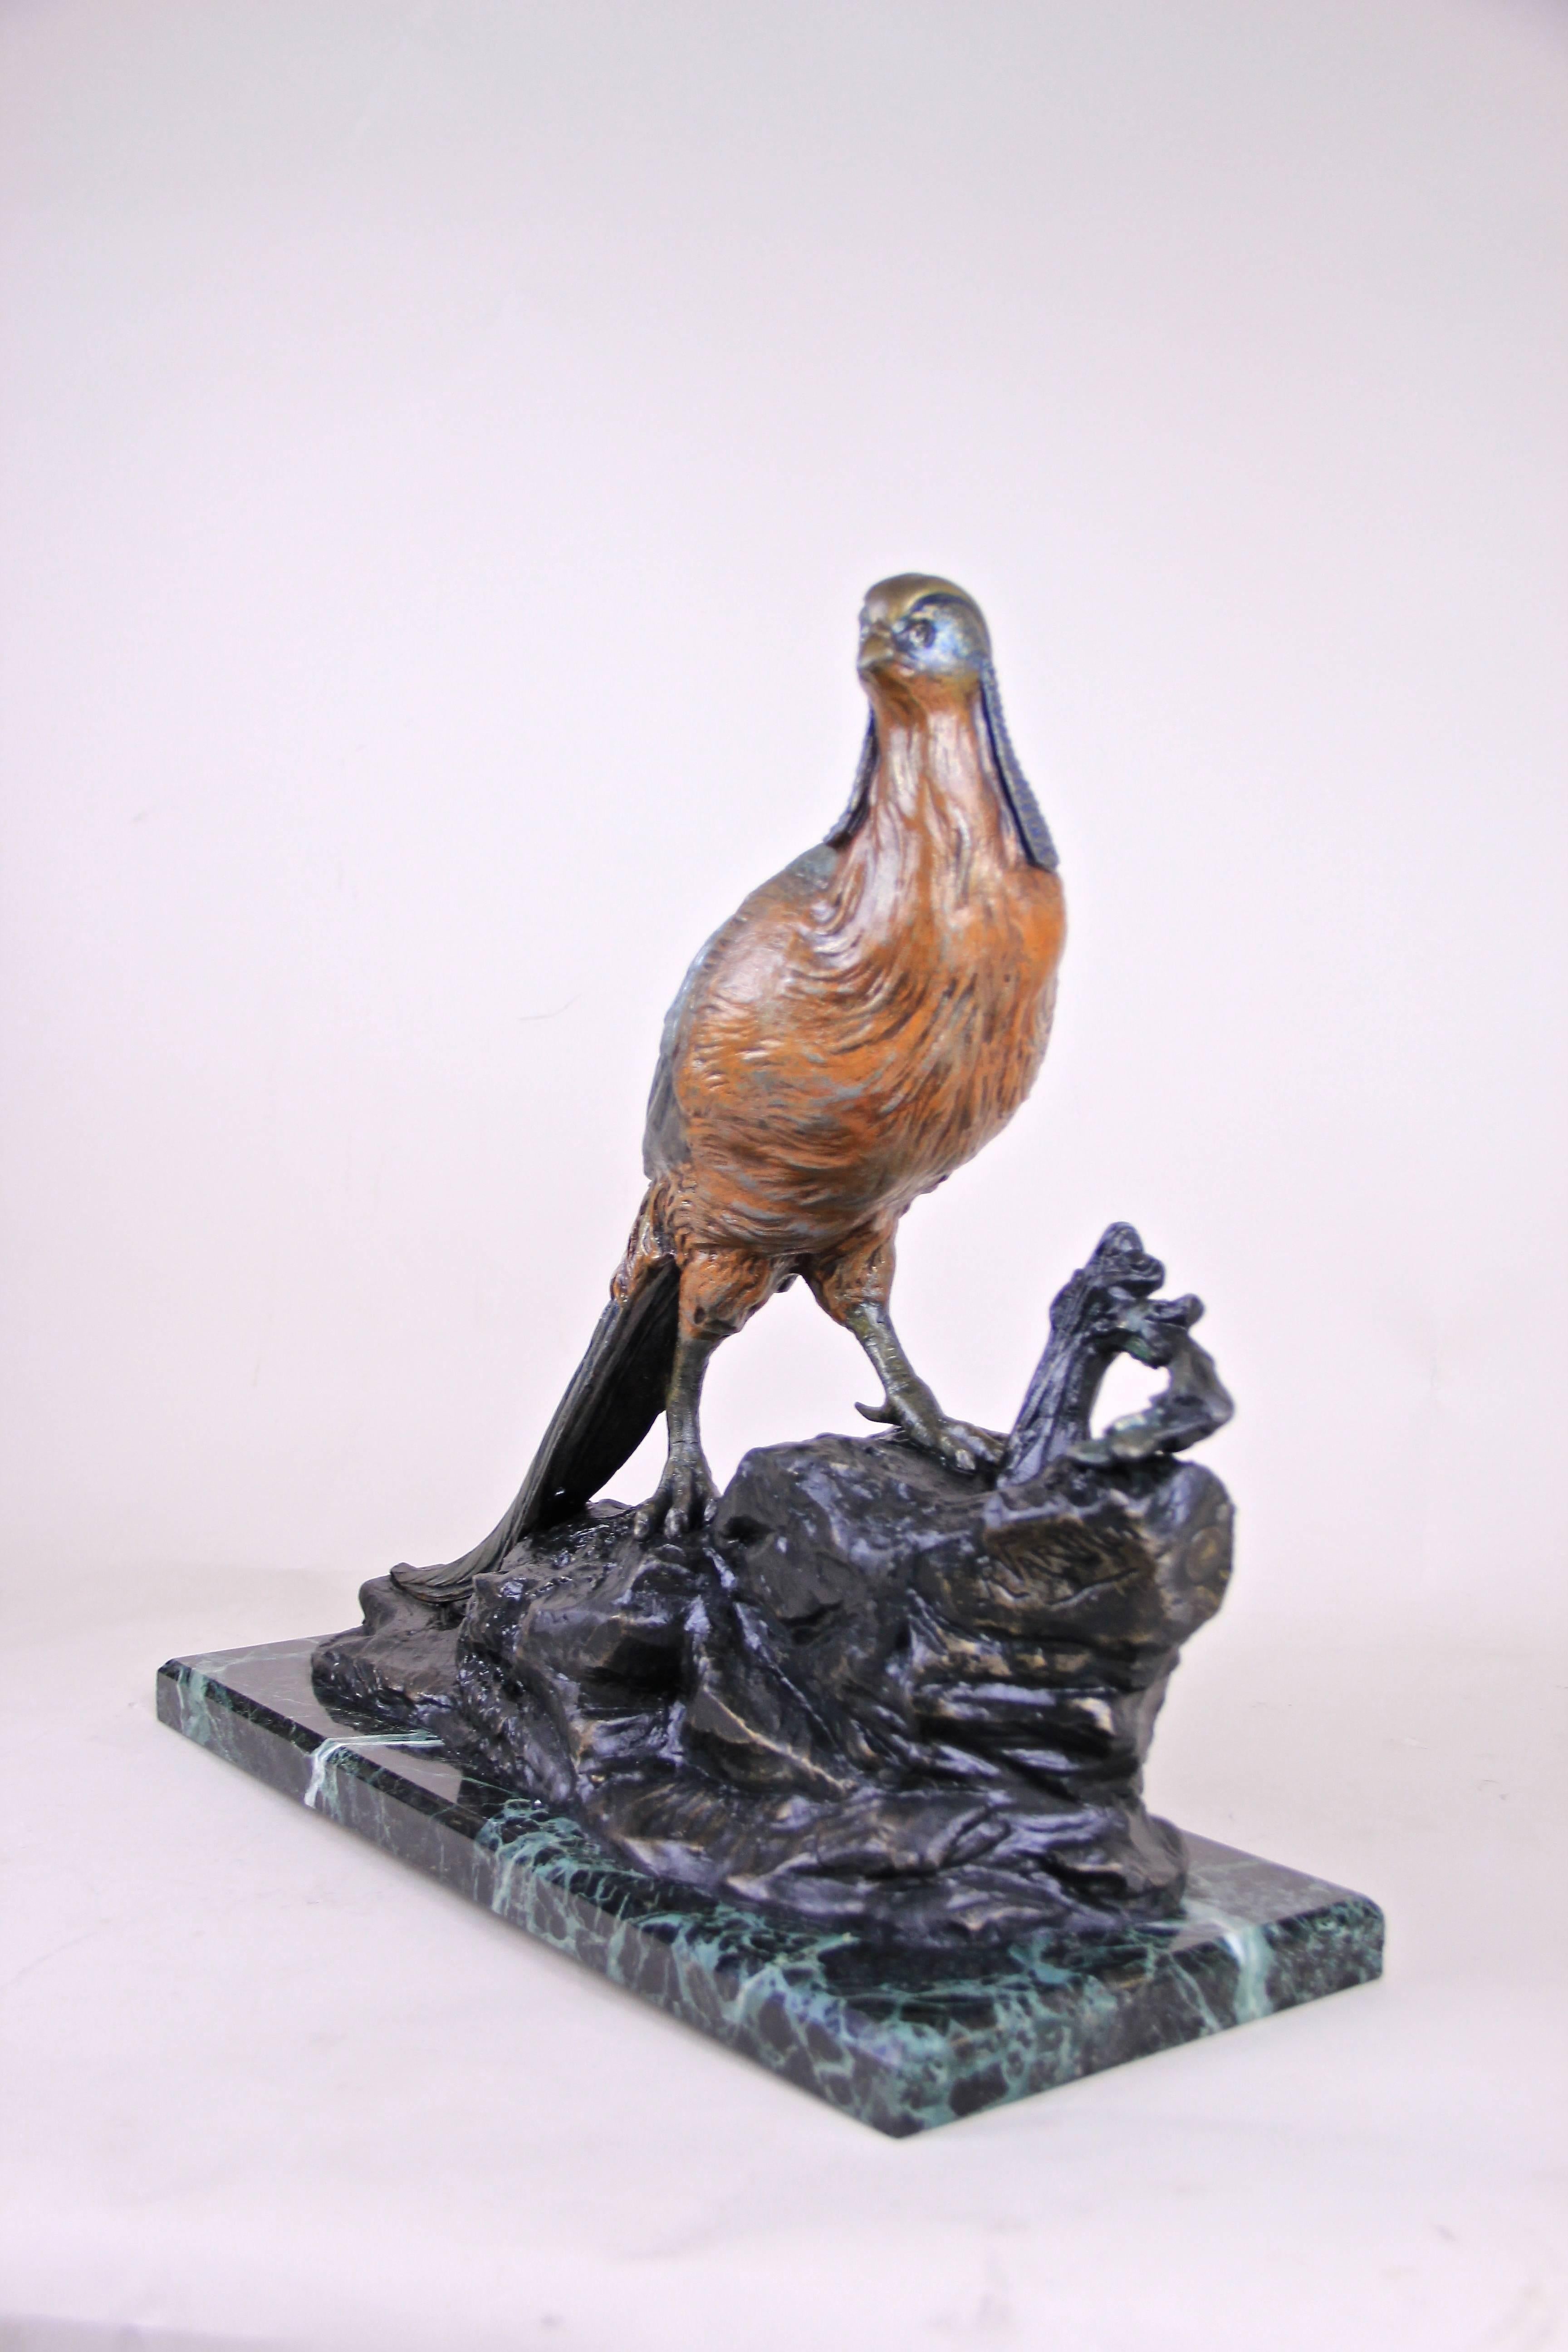 Outstanding Art Nouveau sculpture from, circa 1910 made by the French sculptor Rene Varnier. Out of France from the early Art Nouveau period this amazing bird sculpture captured a majestic pheasant, made with highest attention to details - just take